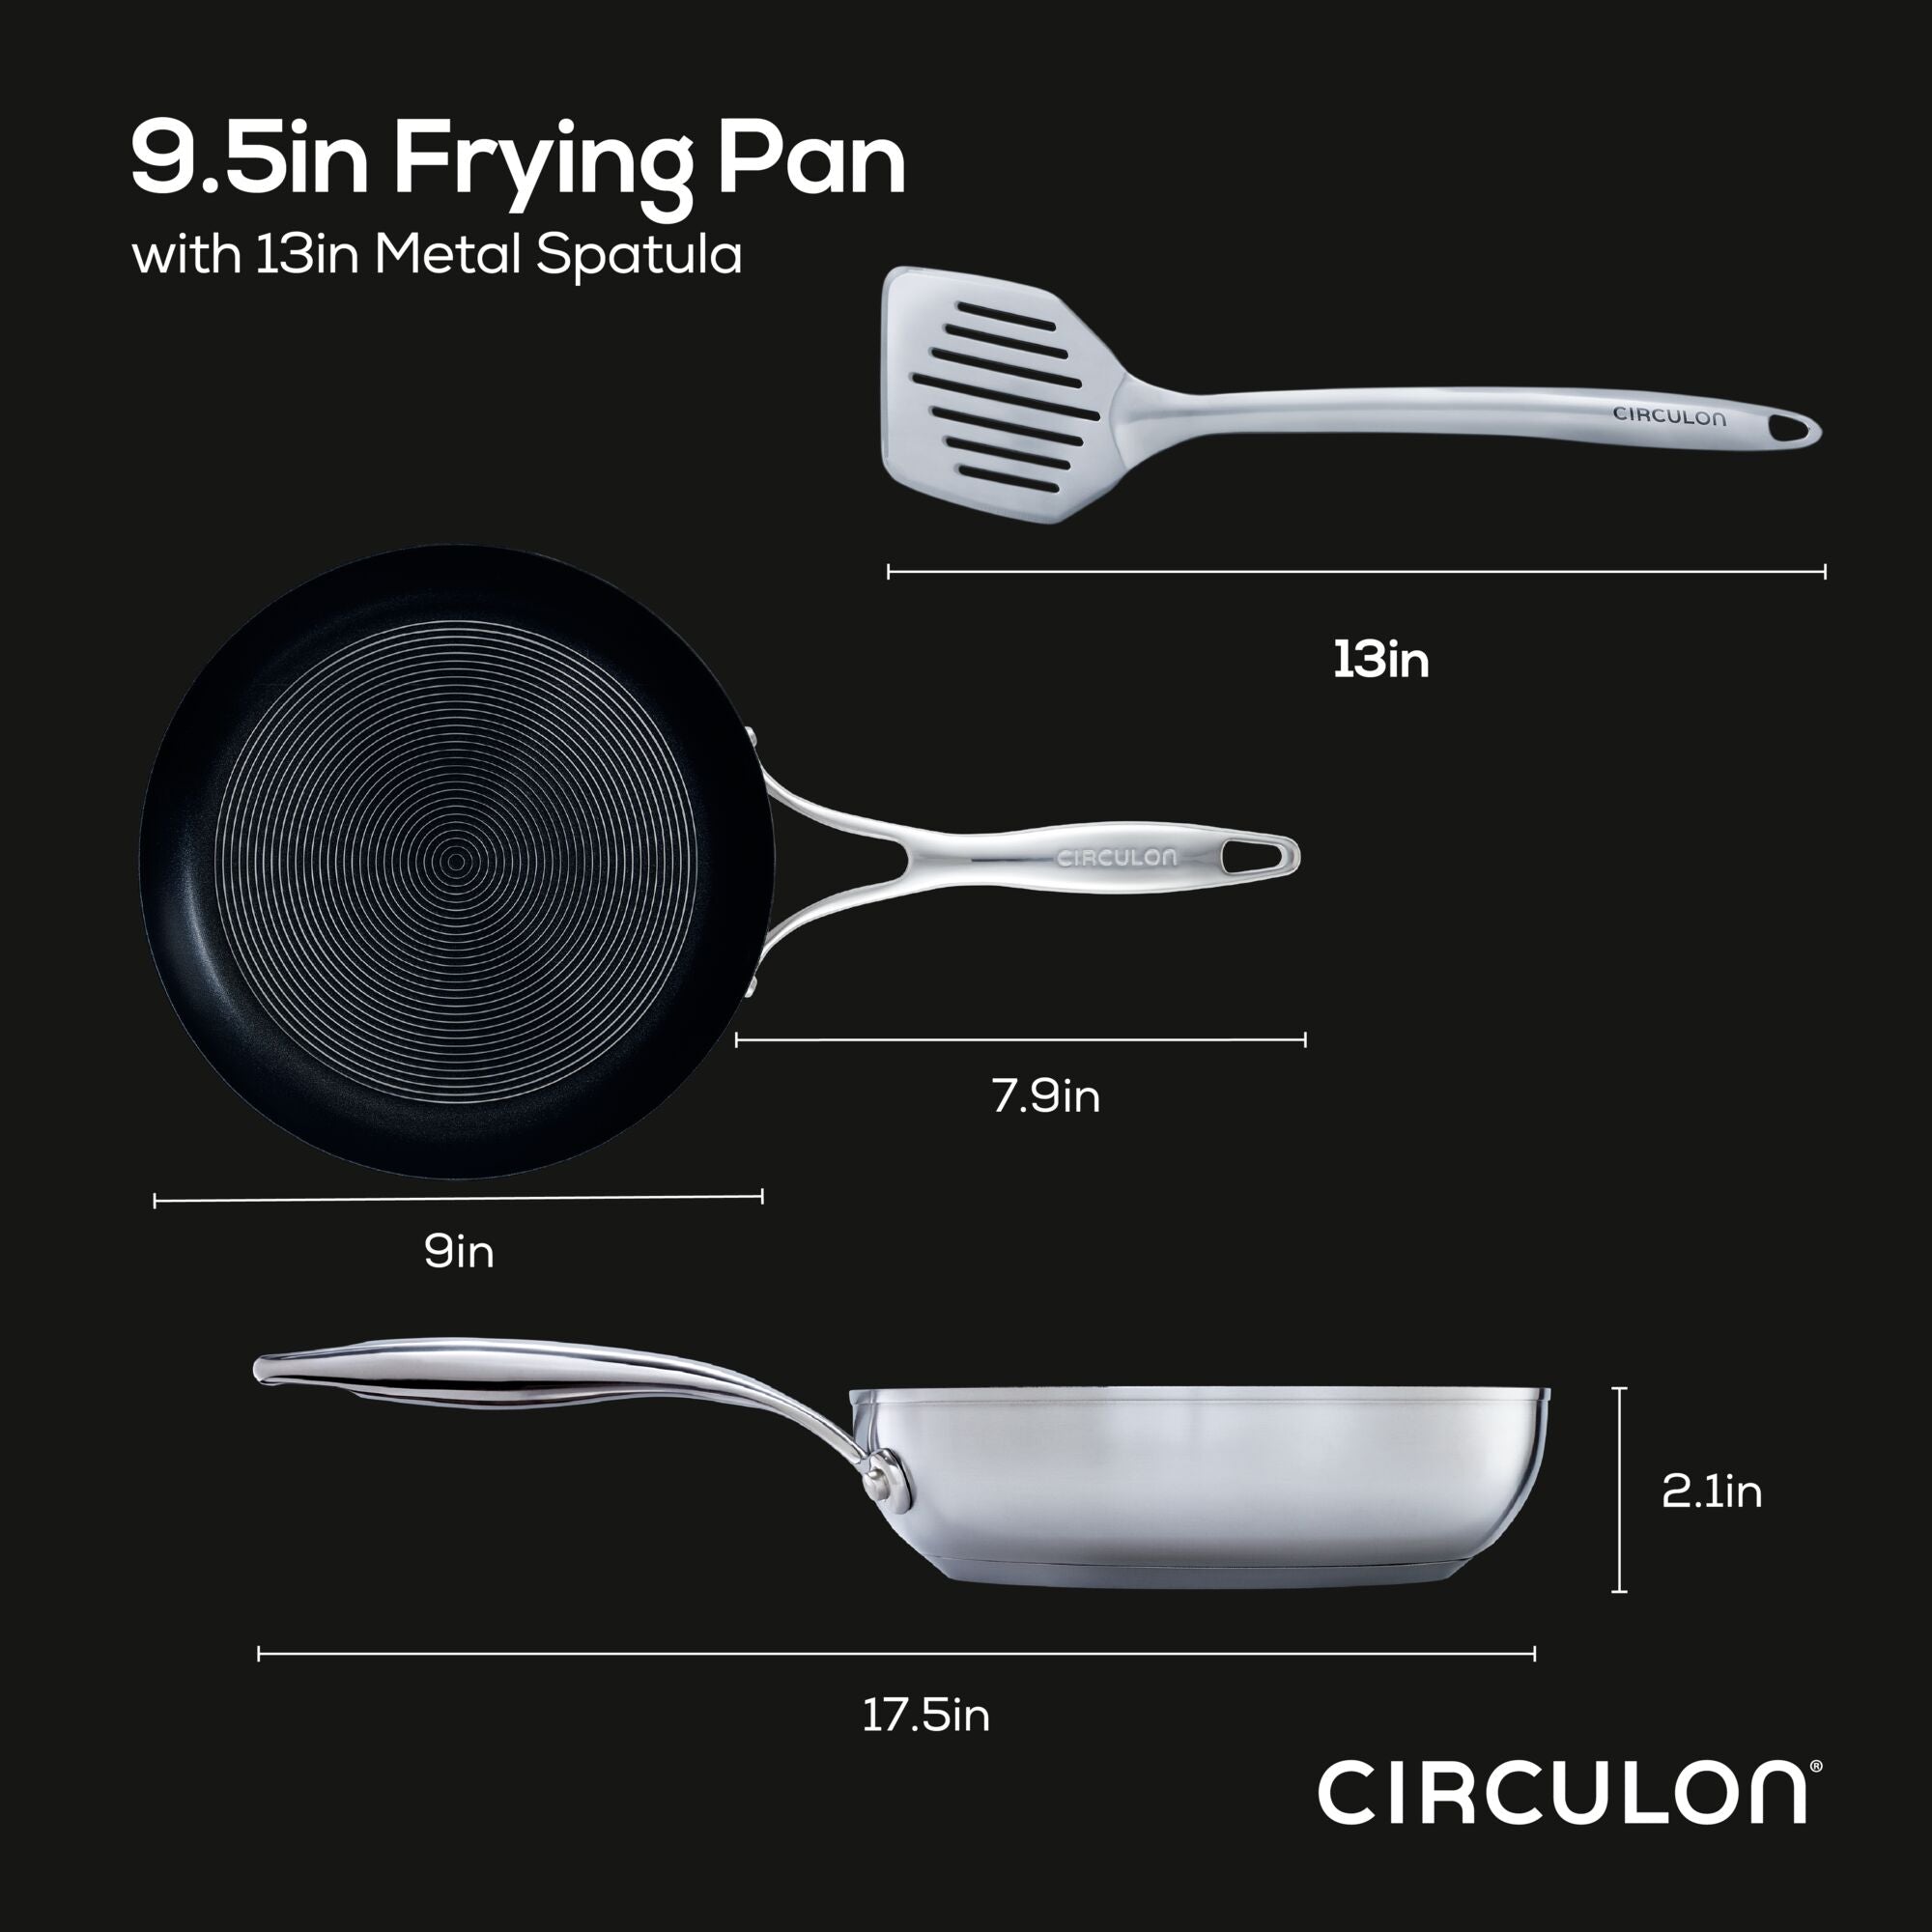 Circulon SteelShield Nonstick Stainless Steel Fry Pan and Spatula Set